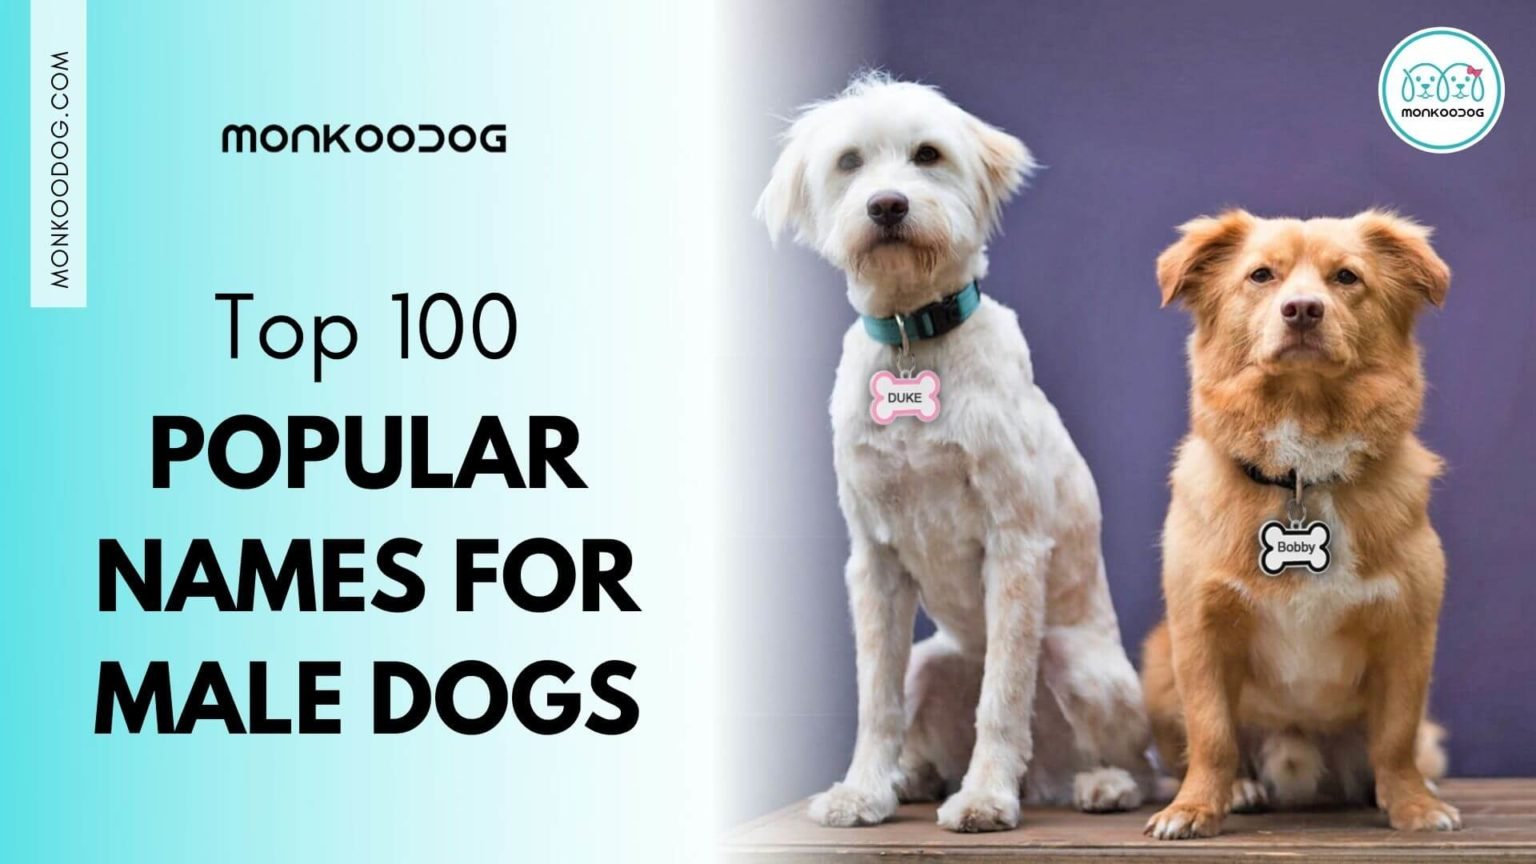 Top 100 Most Popular Male Dog Names Monkoodog